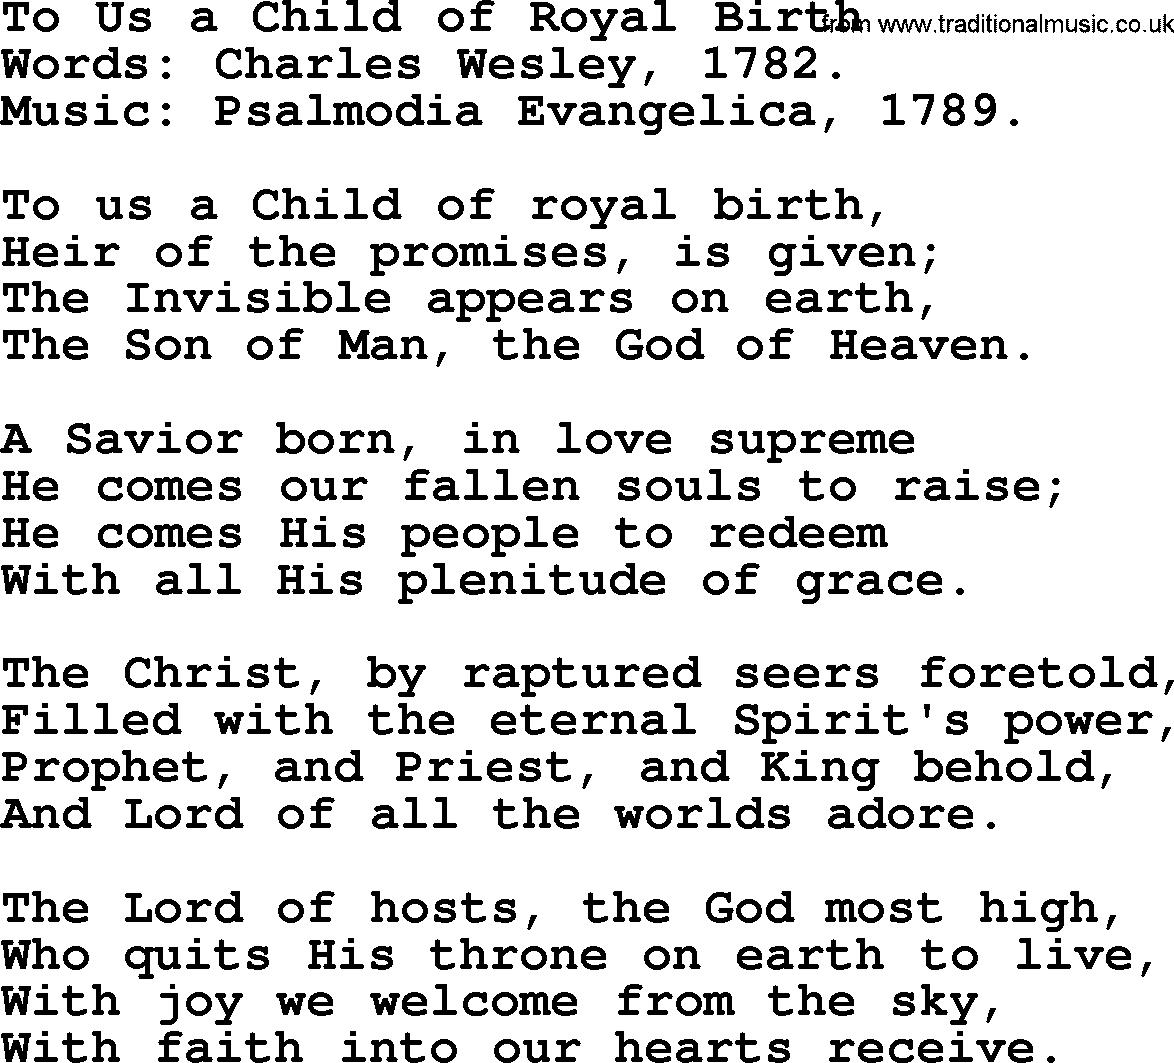 280 Christmas Hymns and songs with PowerPoints and PDF, title: To Us A Child Of Royal Birth, lyrics, PPT and PDF